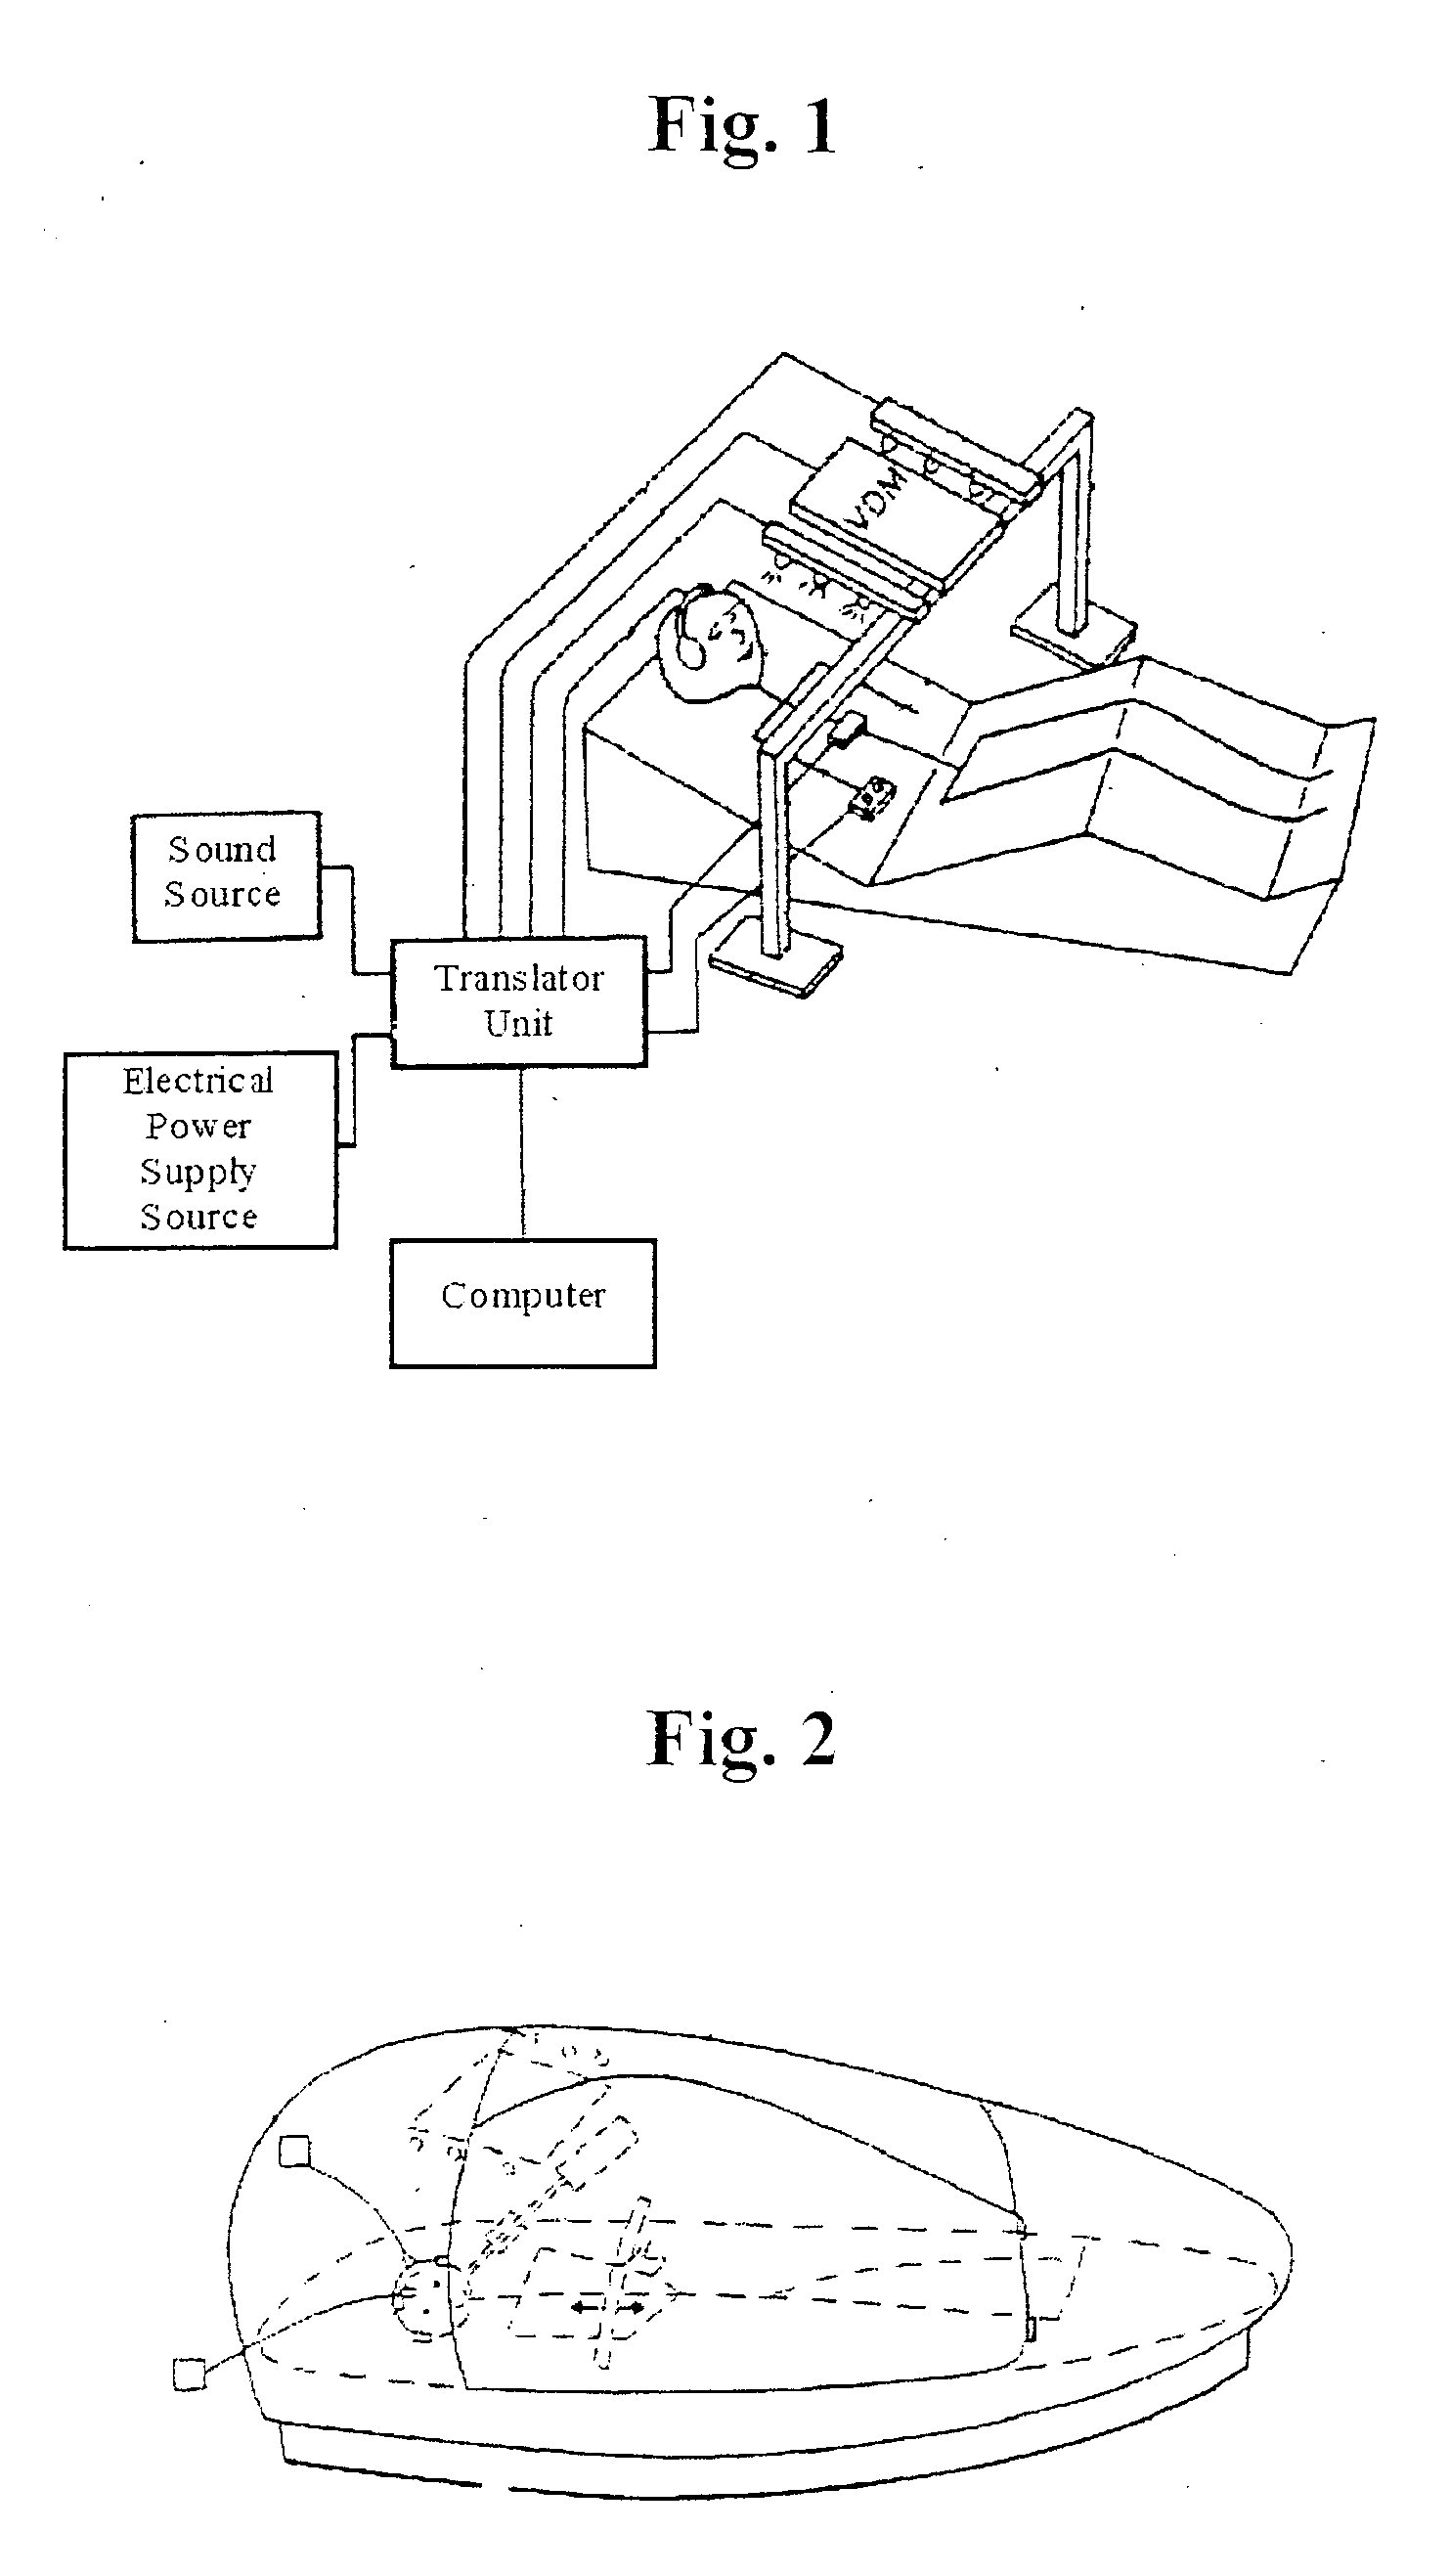 Apparatus and method for inducing emotions